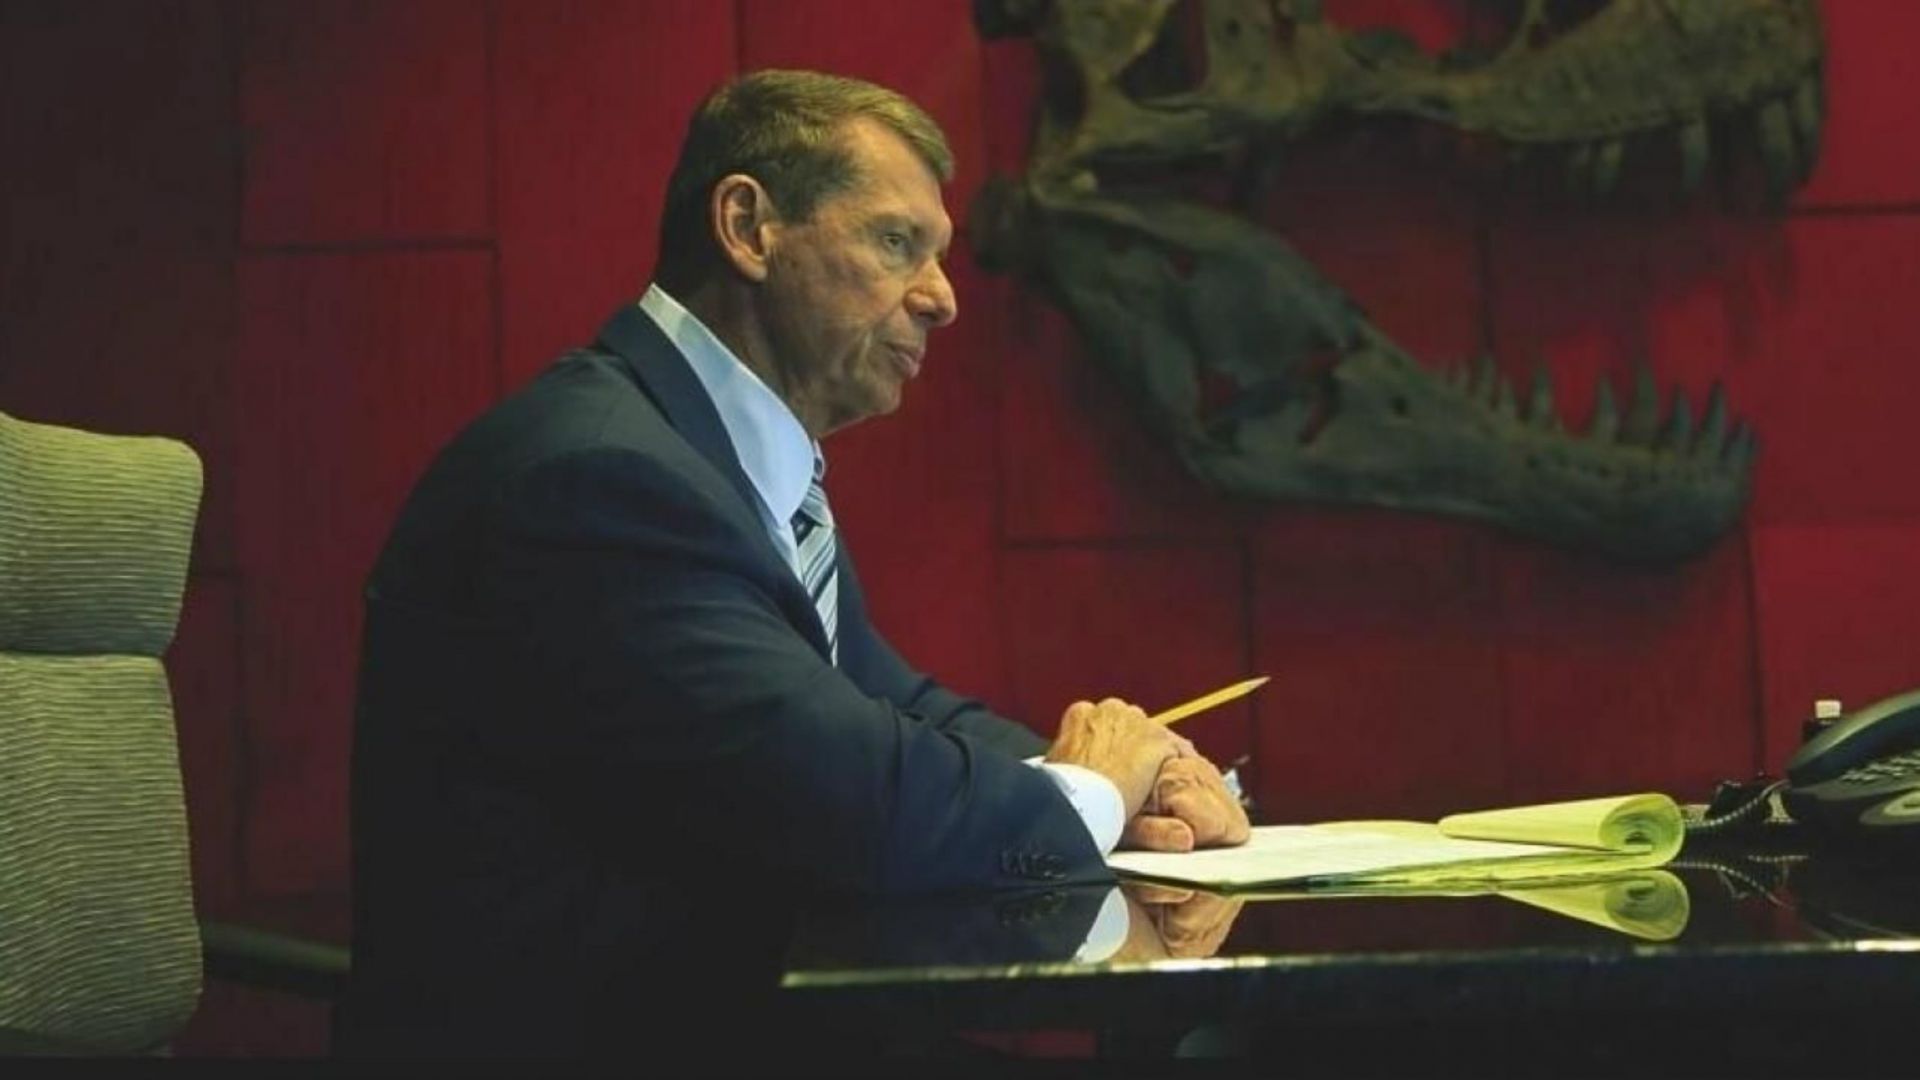 Vince McMahon is the chairman and CEO of WWE